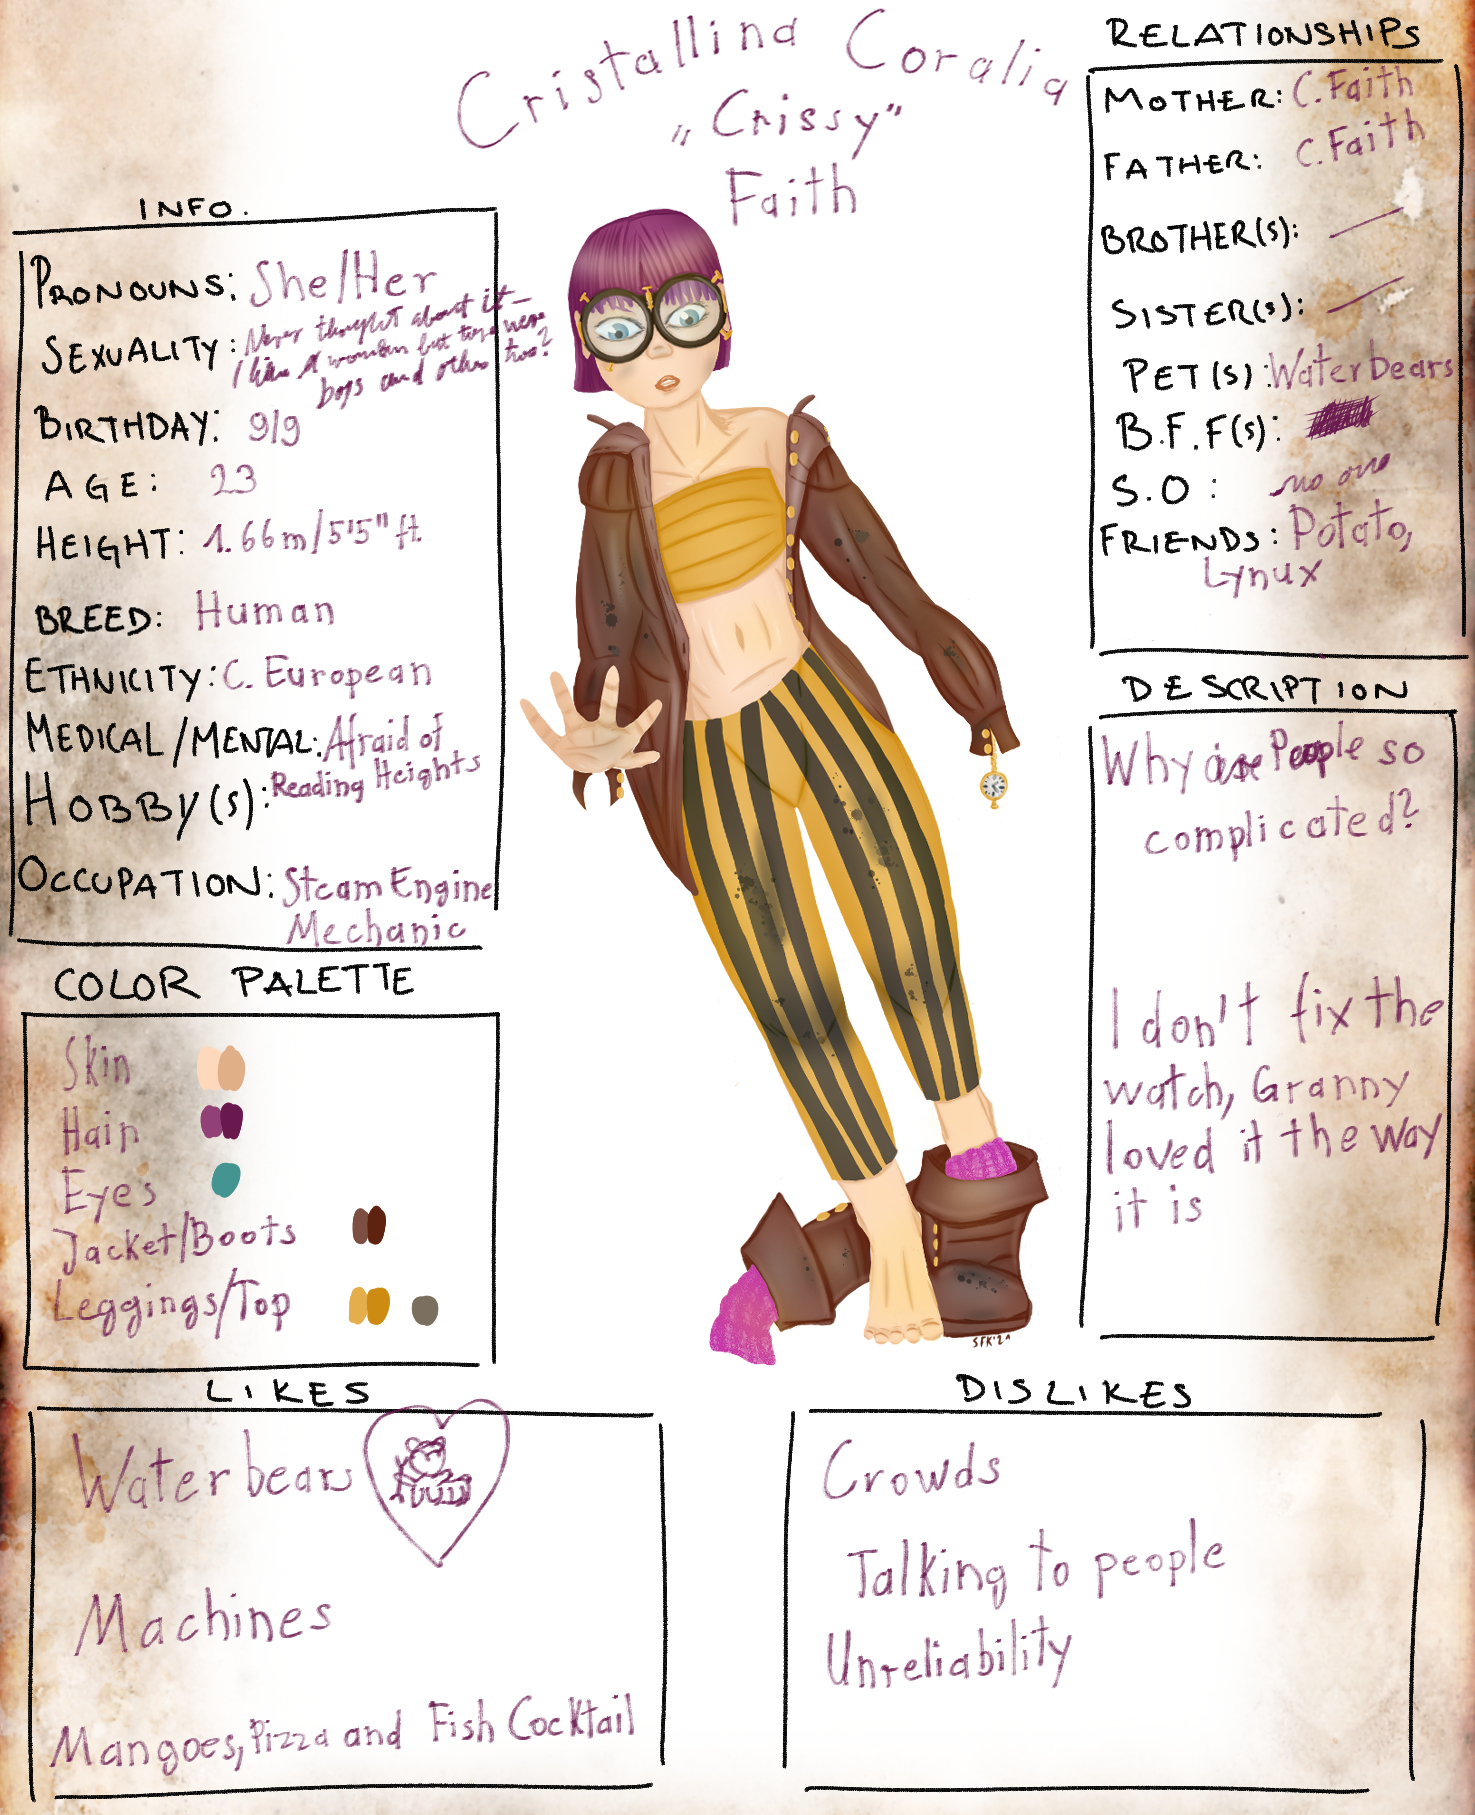 Digital Painting, comic style, a character sheet on "old paper": In the center Crissy Faith, a young mechanic with purple short hair coming home. She is wearing big round glasses, black and orange striped trousers and a belly free strapless orange top. She is taking off her leather jacket, the arms still in the sleeves (the left arm not to see right now), and she is slipping out of the boots and purple socks. One boot is lying on its side behind her right foot which is standing on her left boot's tip. Her pocket watch is dangling out of her left sleeve. She is stumbling over her own boots and trying to keep balance. There are dots of oil and dirt on her cheeks and on the trousers, the boots and the jacket. Next to her boxes with topics, left side: Info (Pronouns: She/Her; Sexuality (im wobbly handwriting): Never thought about it - I like (a) wom(a)en but there were boys and others too?; Birthday: 9/9; Age: 23; Height: 1.66m/5'5''ft; Breed: Human; Ethnicity: C. European; Medical/Mental: Afraid of Heights; Hobbys: Reading; Occupation: Steam Engine Mechanic); Color Palette (Skin, Hair, Eyes, Jacket/Boots; Leggings/Top); right side: Relationships (Mother: C. Faith; Father: C. Faith; Brother(s): -; Sister(s): -; Pet(s): Water bears; BFF(s): Crossed over letters; SO: no one; Friends: Potato, Lynux); Description ("Why (is) are P(au)eople so complicated?" - "I don't fix the watch, Granny loved it the way it is"), Bottom: Likes (Water bears + a water bear in a heart shape; Machines; Mangoes, Pizza and Fish Cocktail); Dislikes (Crowds; Talking to people; Unreliability)